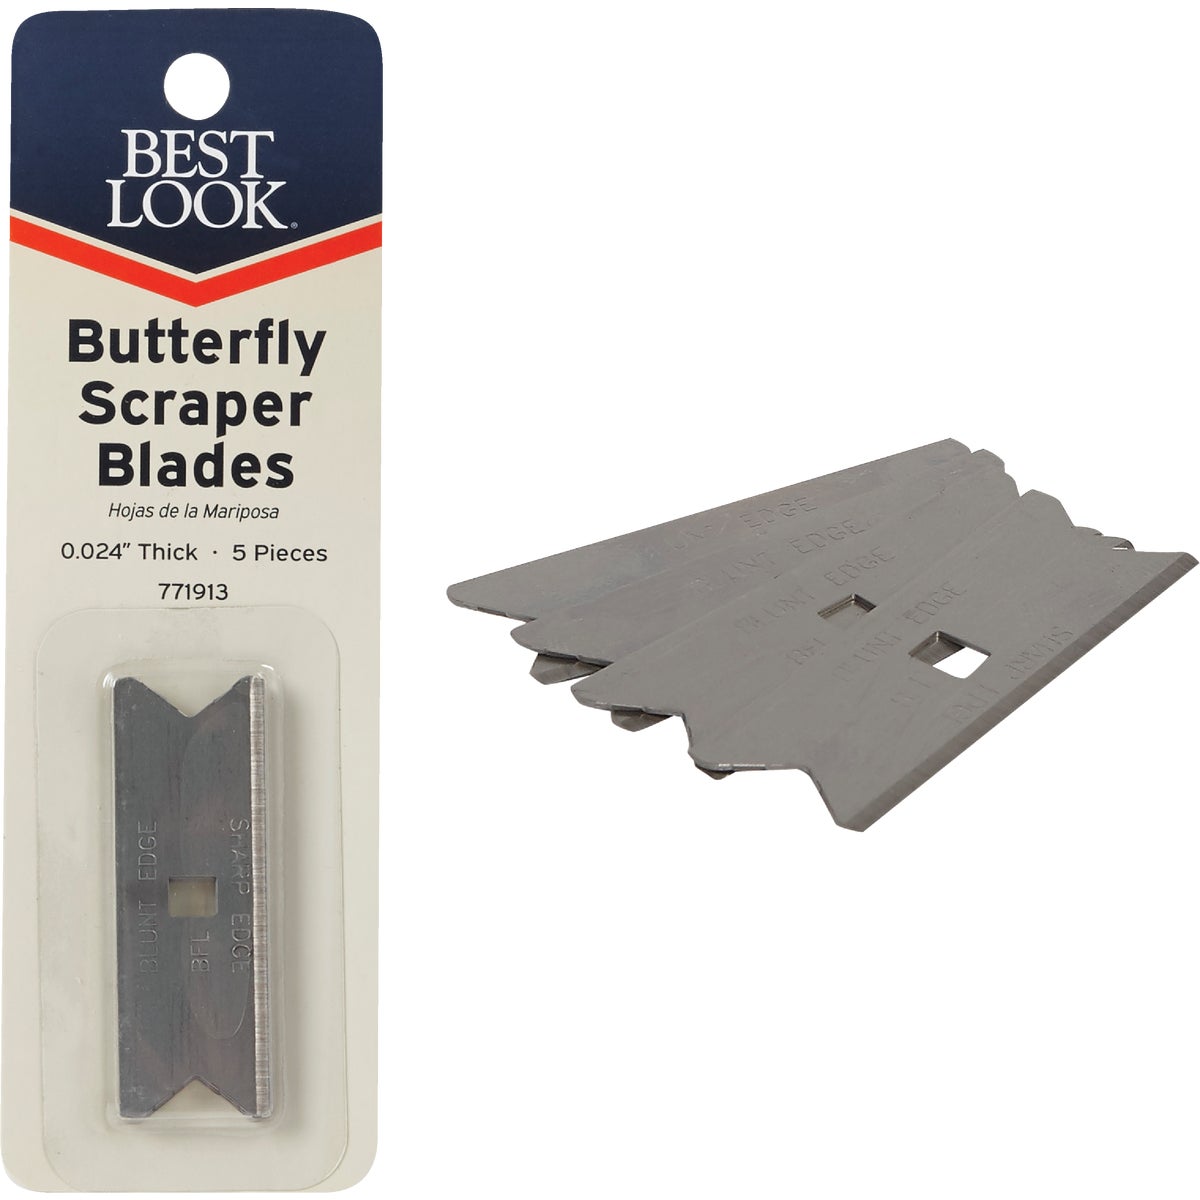 Item 771913, The double-edge Butterfly Scraper Blades have a sharp edge for glass and 